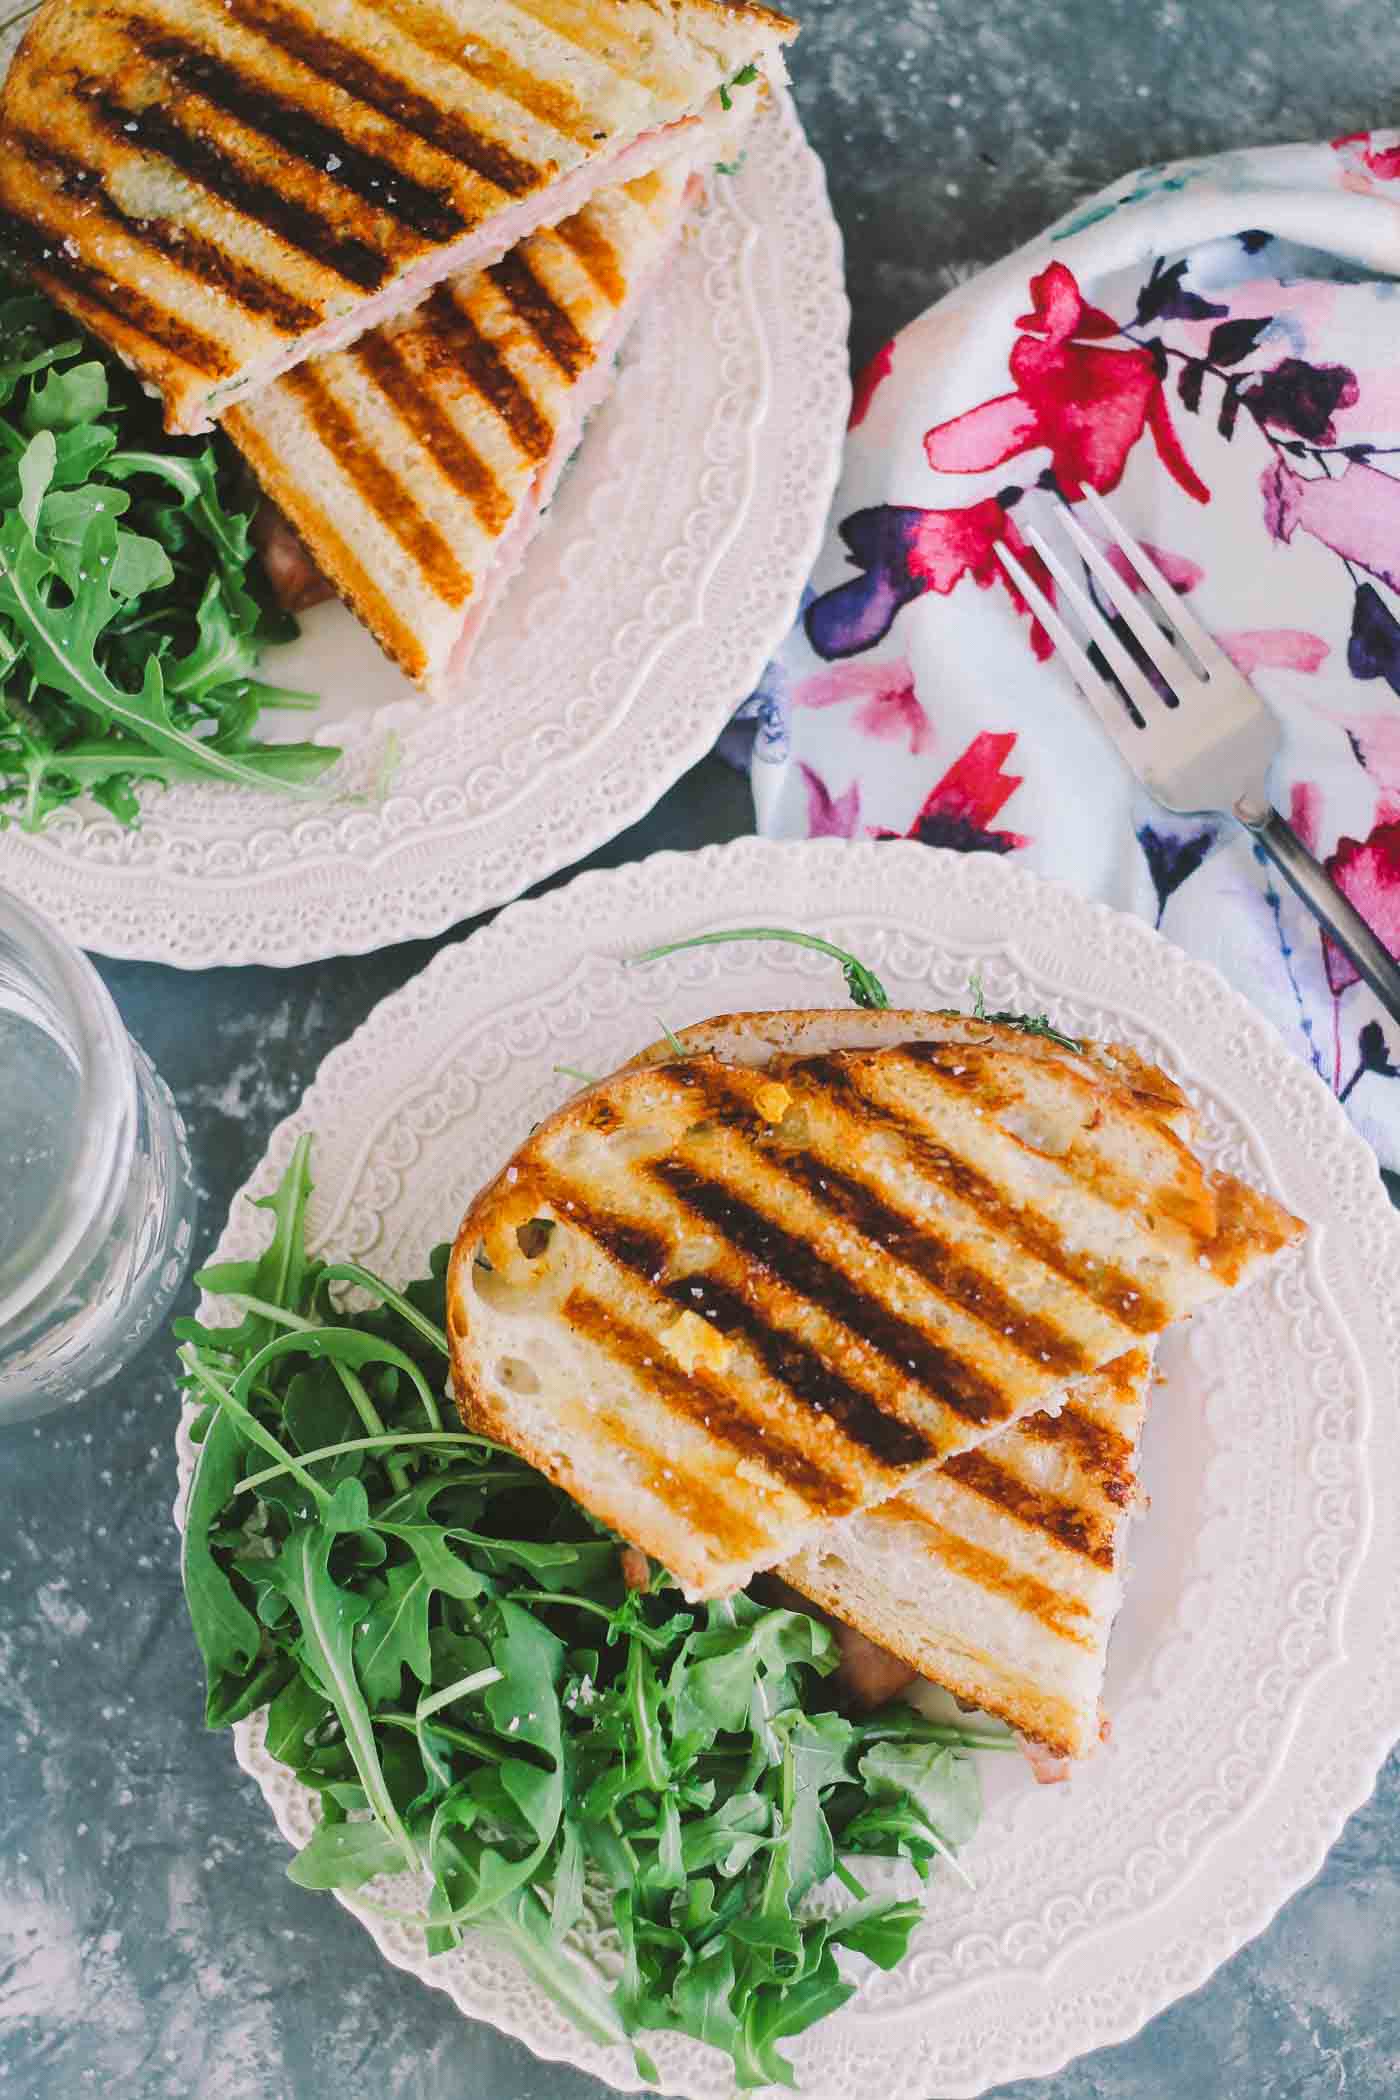 croque monsieur paninis are an easy & delicious lunch or brunch meal. a seriously simple, yet seriously elegant way to use up easter ham leftovers or to entertain a couple of girlfriends for a casual weekend lunch (just don't forget the rosé!) | croque monsieur, sandwich, french recipe, girls night, easy recipe, easter, easy entertaining |